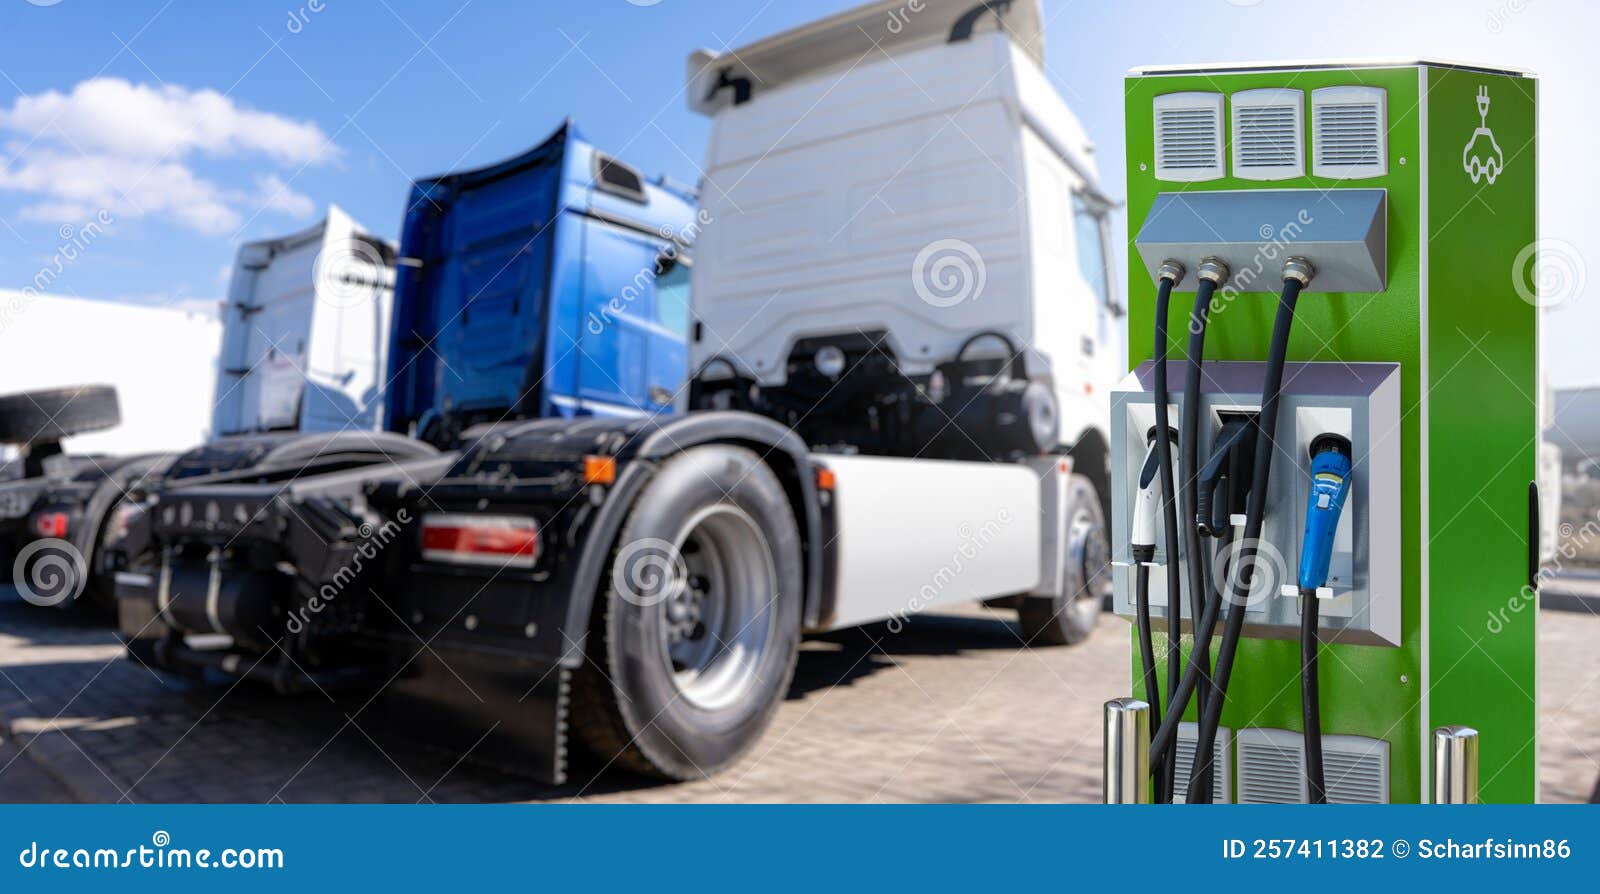 electric truck with charging station